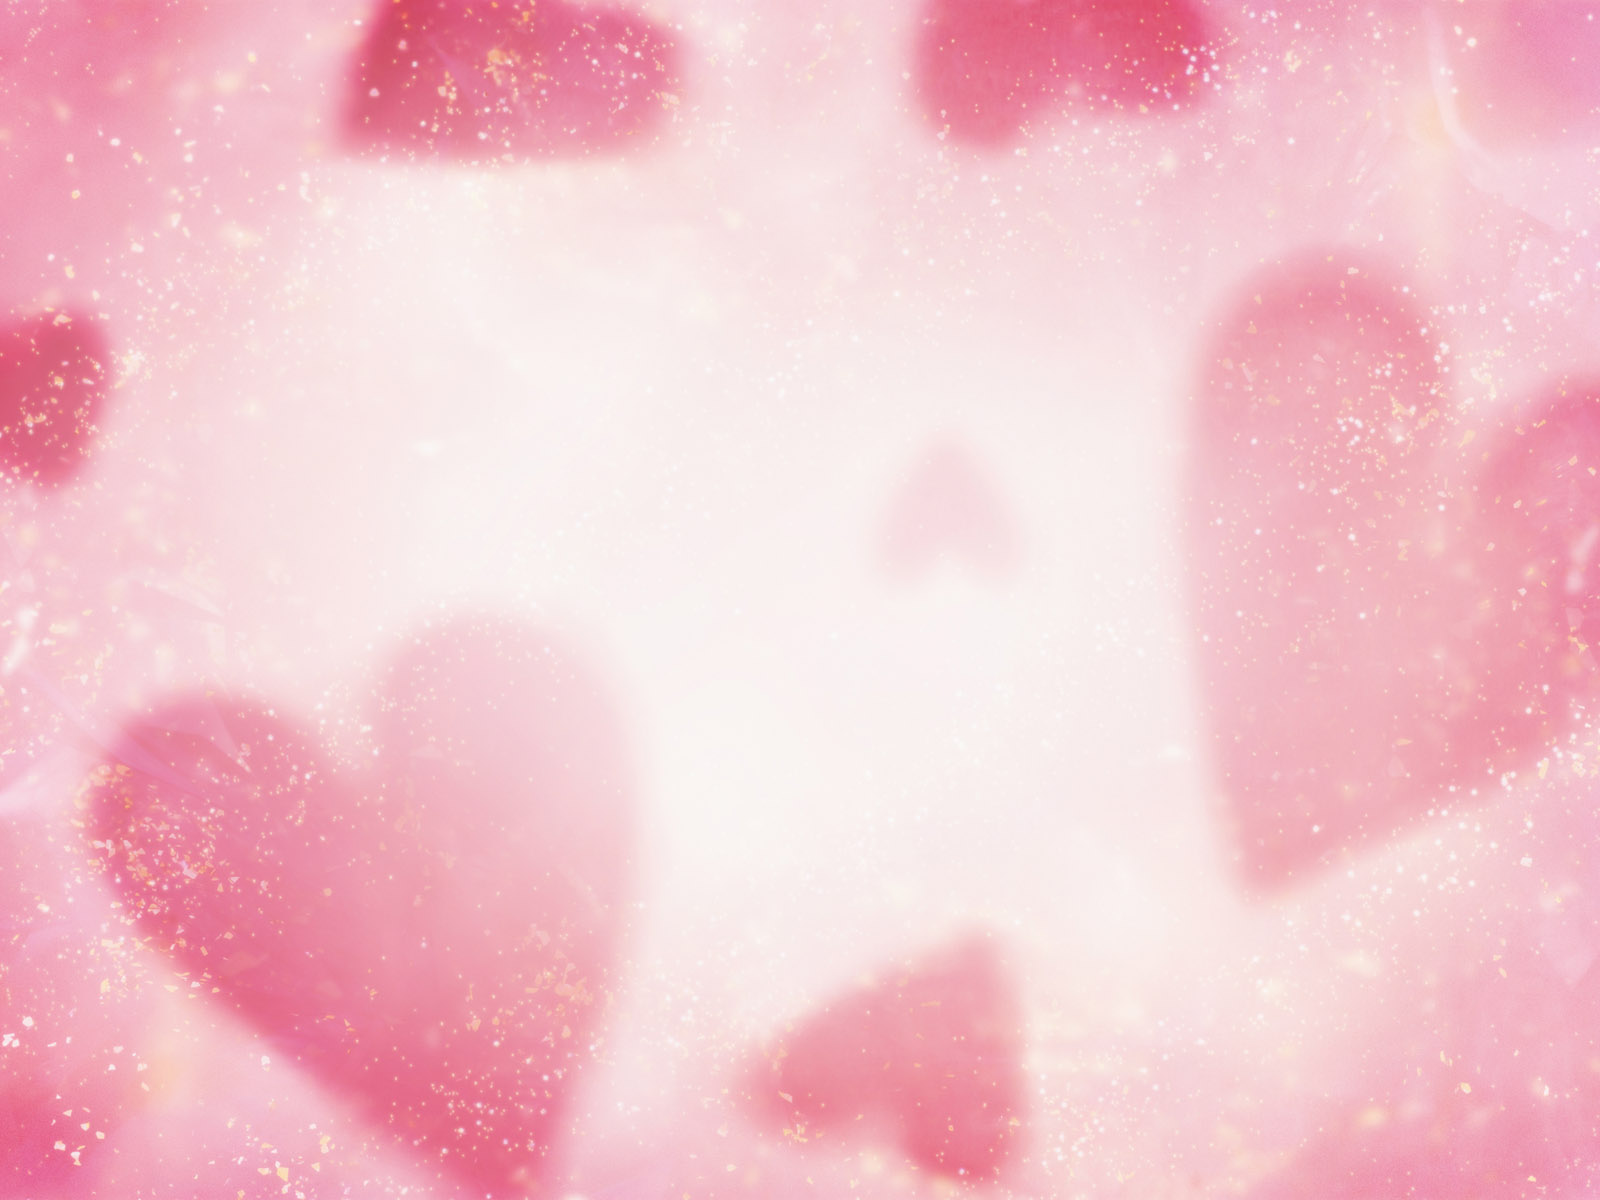 Free Scenery Wallpaper Includes Pink Little Hearts Sure to Please